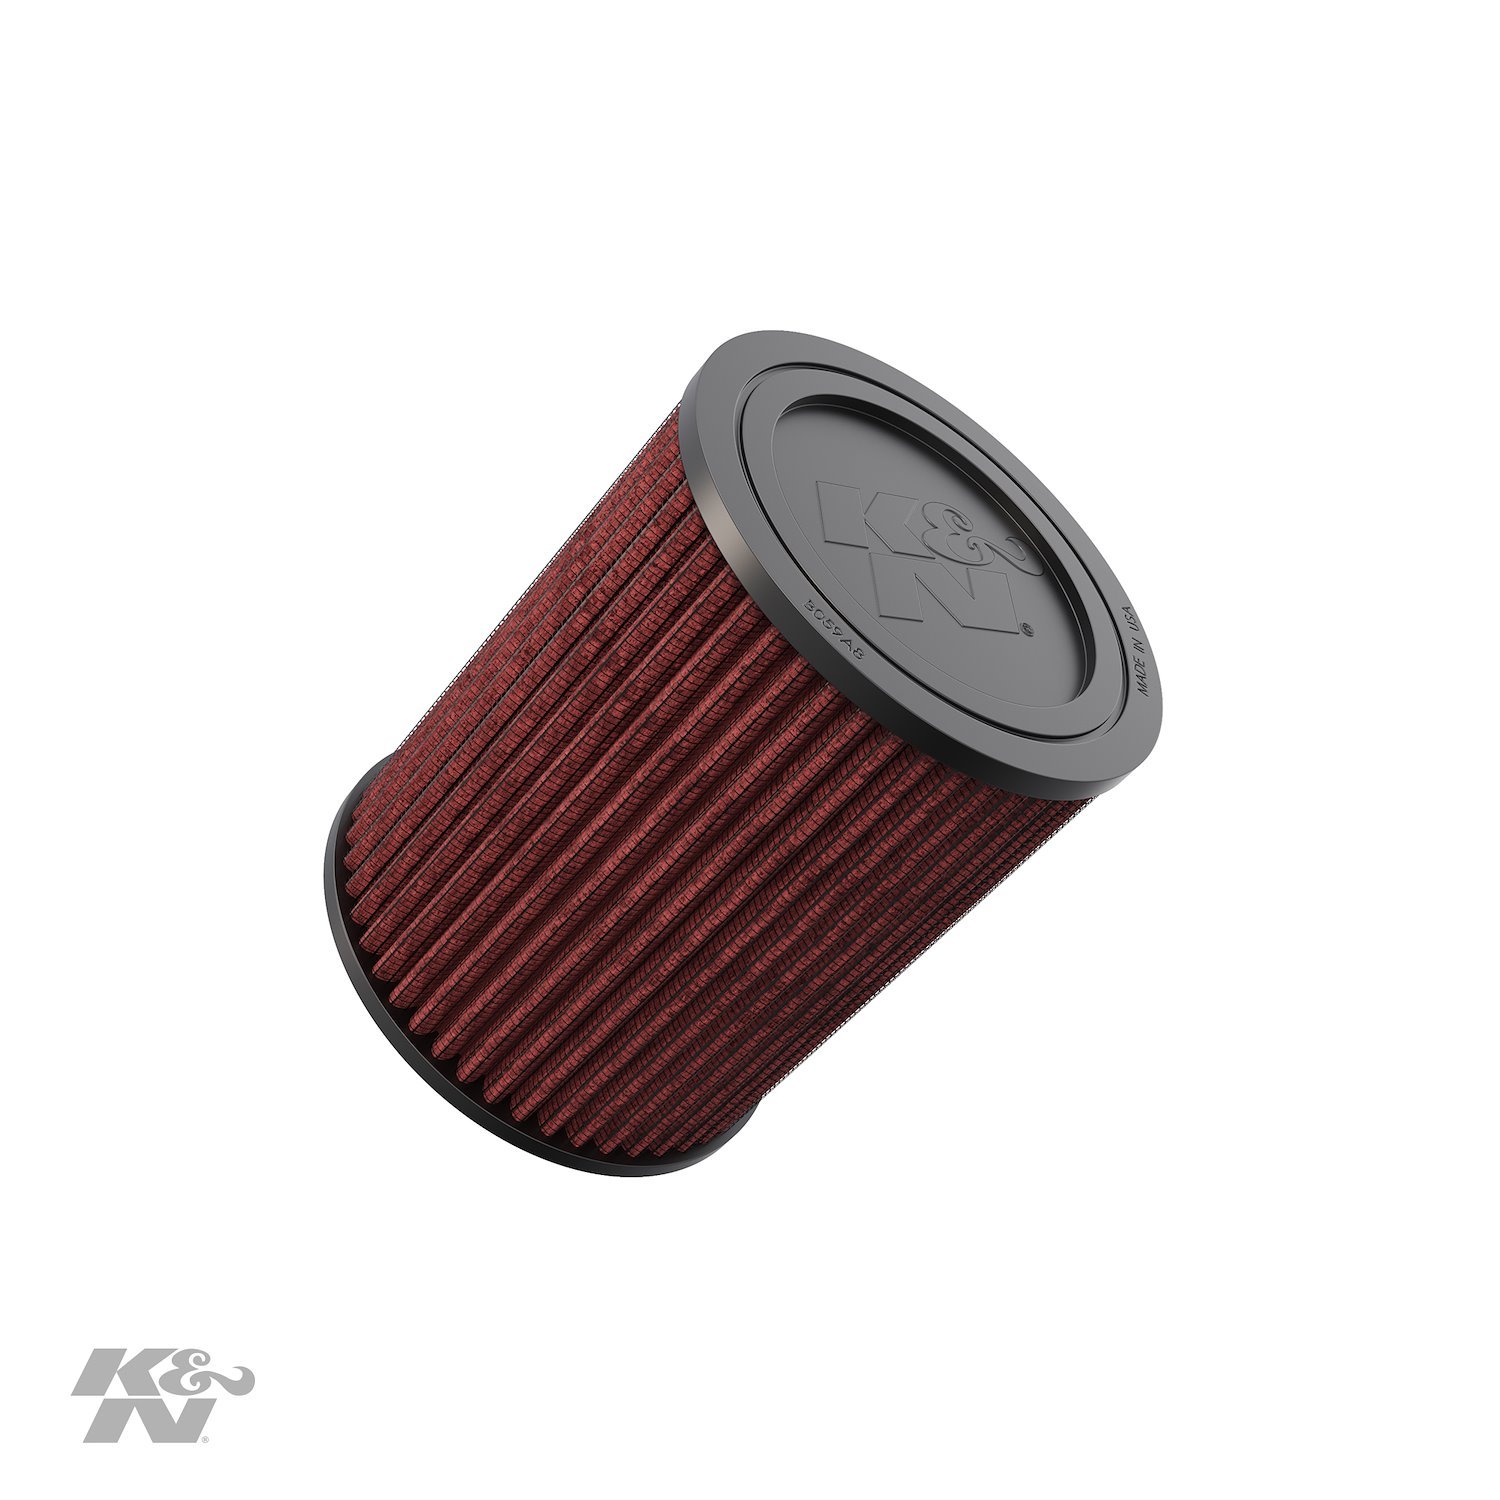 Round Straight Air Filter Flange Dia. (F): 3.625" (92 mm)